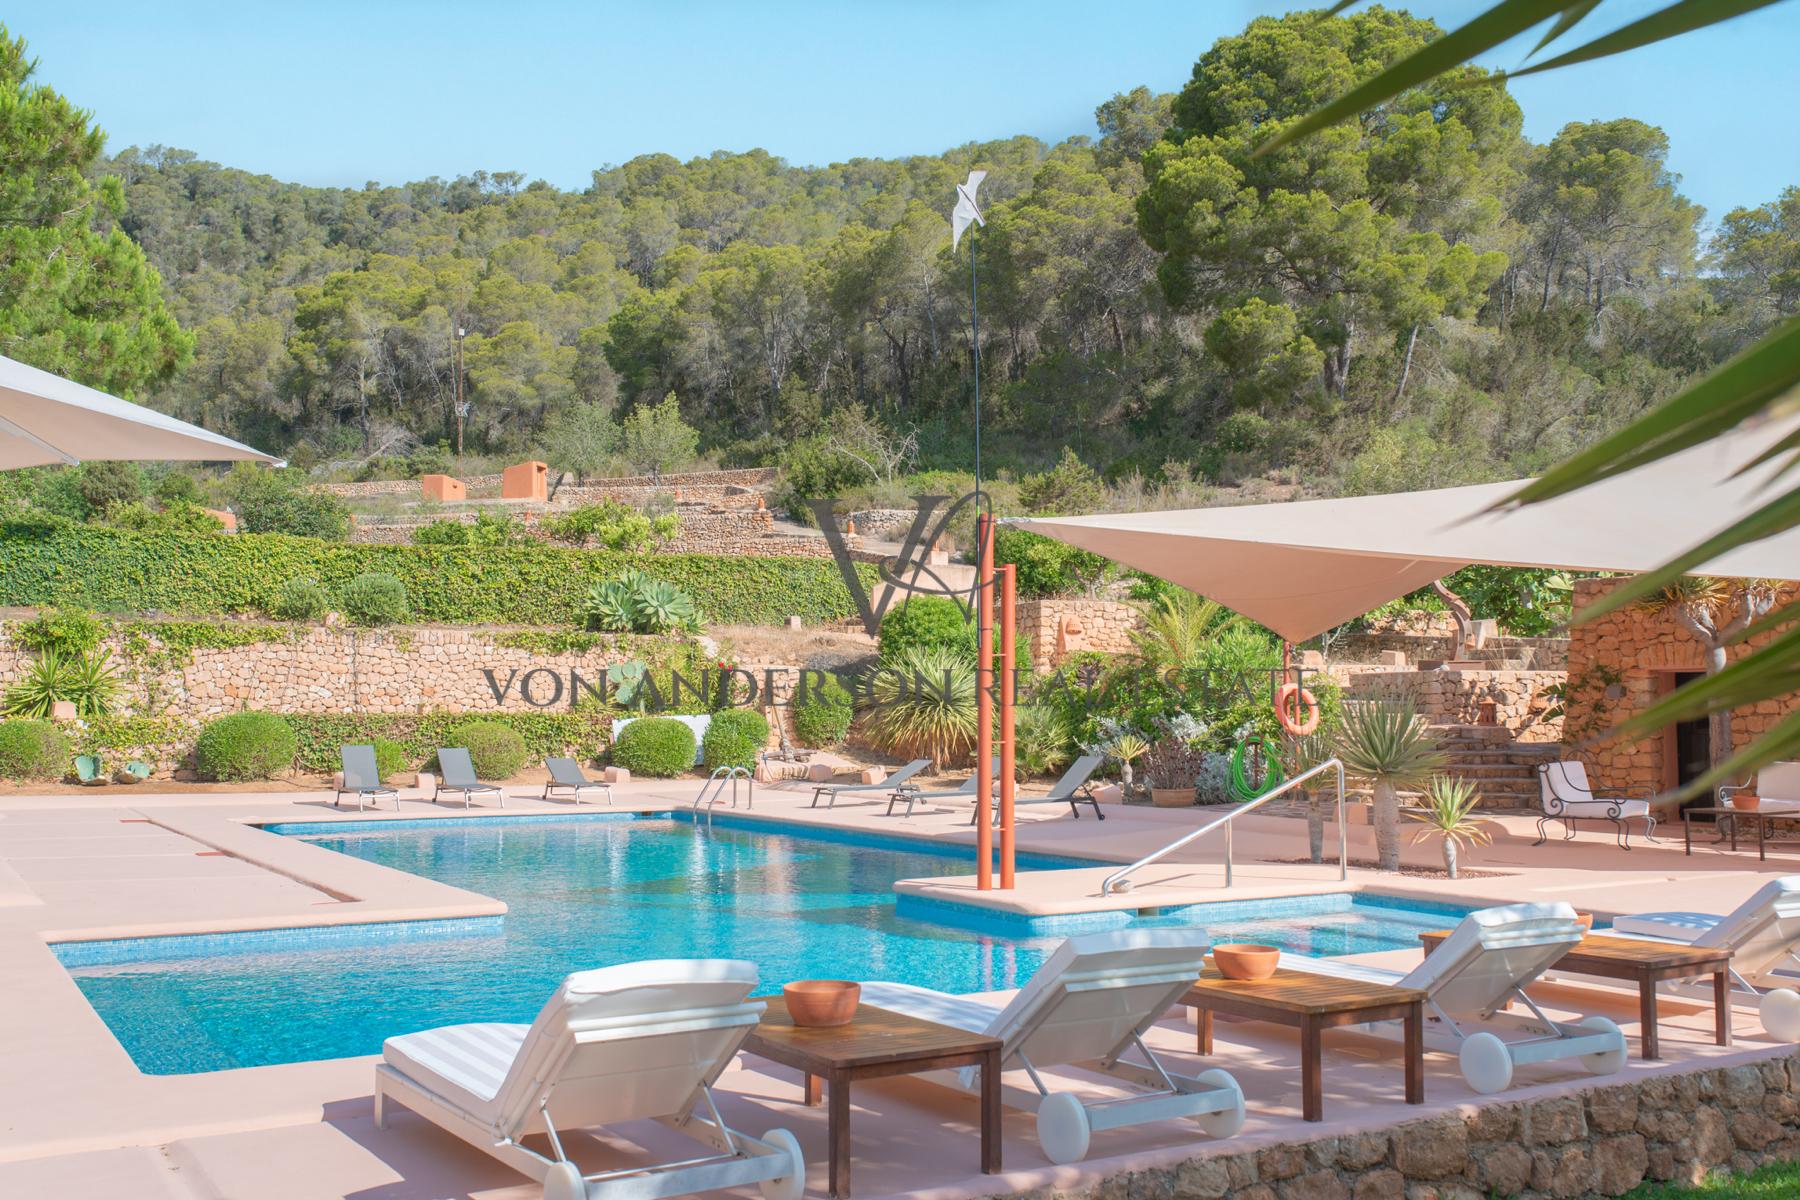 Magnificent Country Estate with Multiple Guest Houses in Beautiful Tranquil Setting, ref. VA1035, for sale in Ibiza by Von Anderson Real Estate